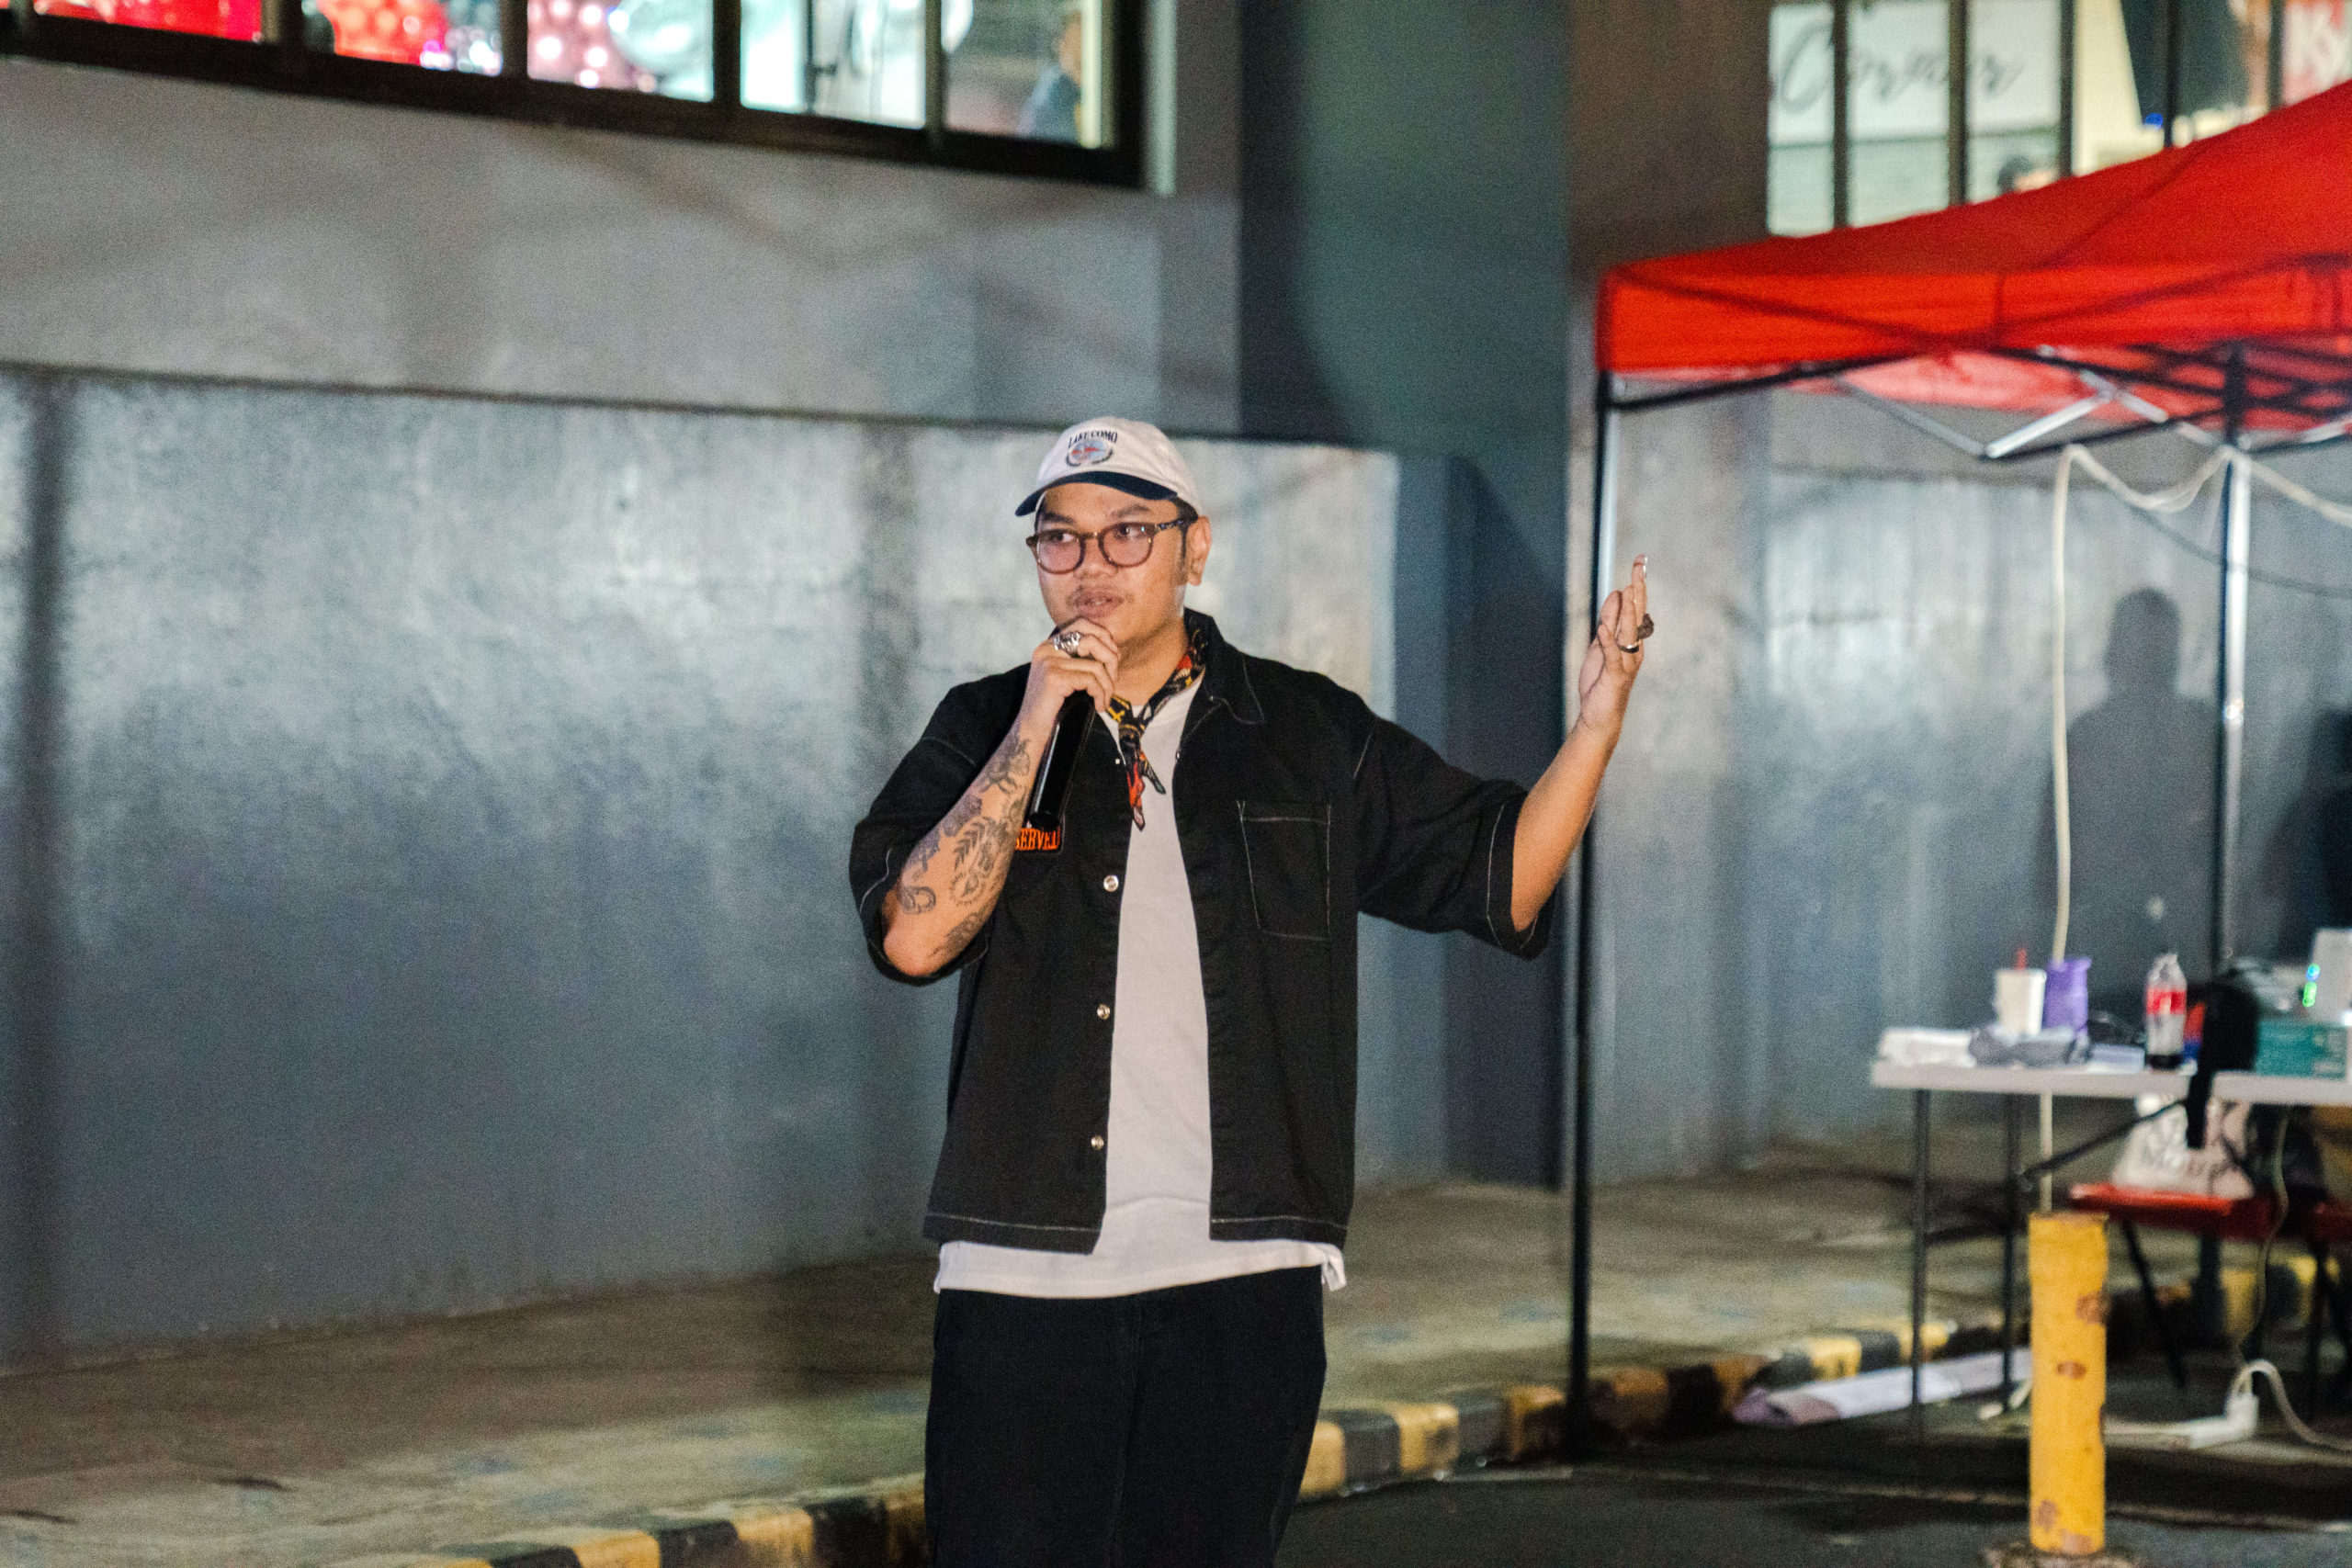 ‘Christmas Never Ends’ music video director Bryan Sendiong talks about the production of this year’s Christmas ID during the annual Christmas Lighting Ceremony. Photo by Johann Avery Marcalas